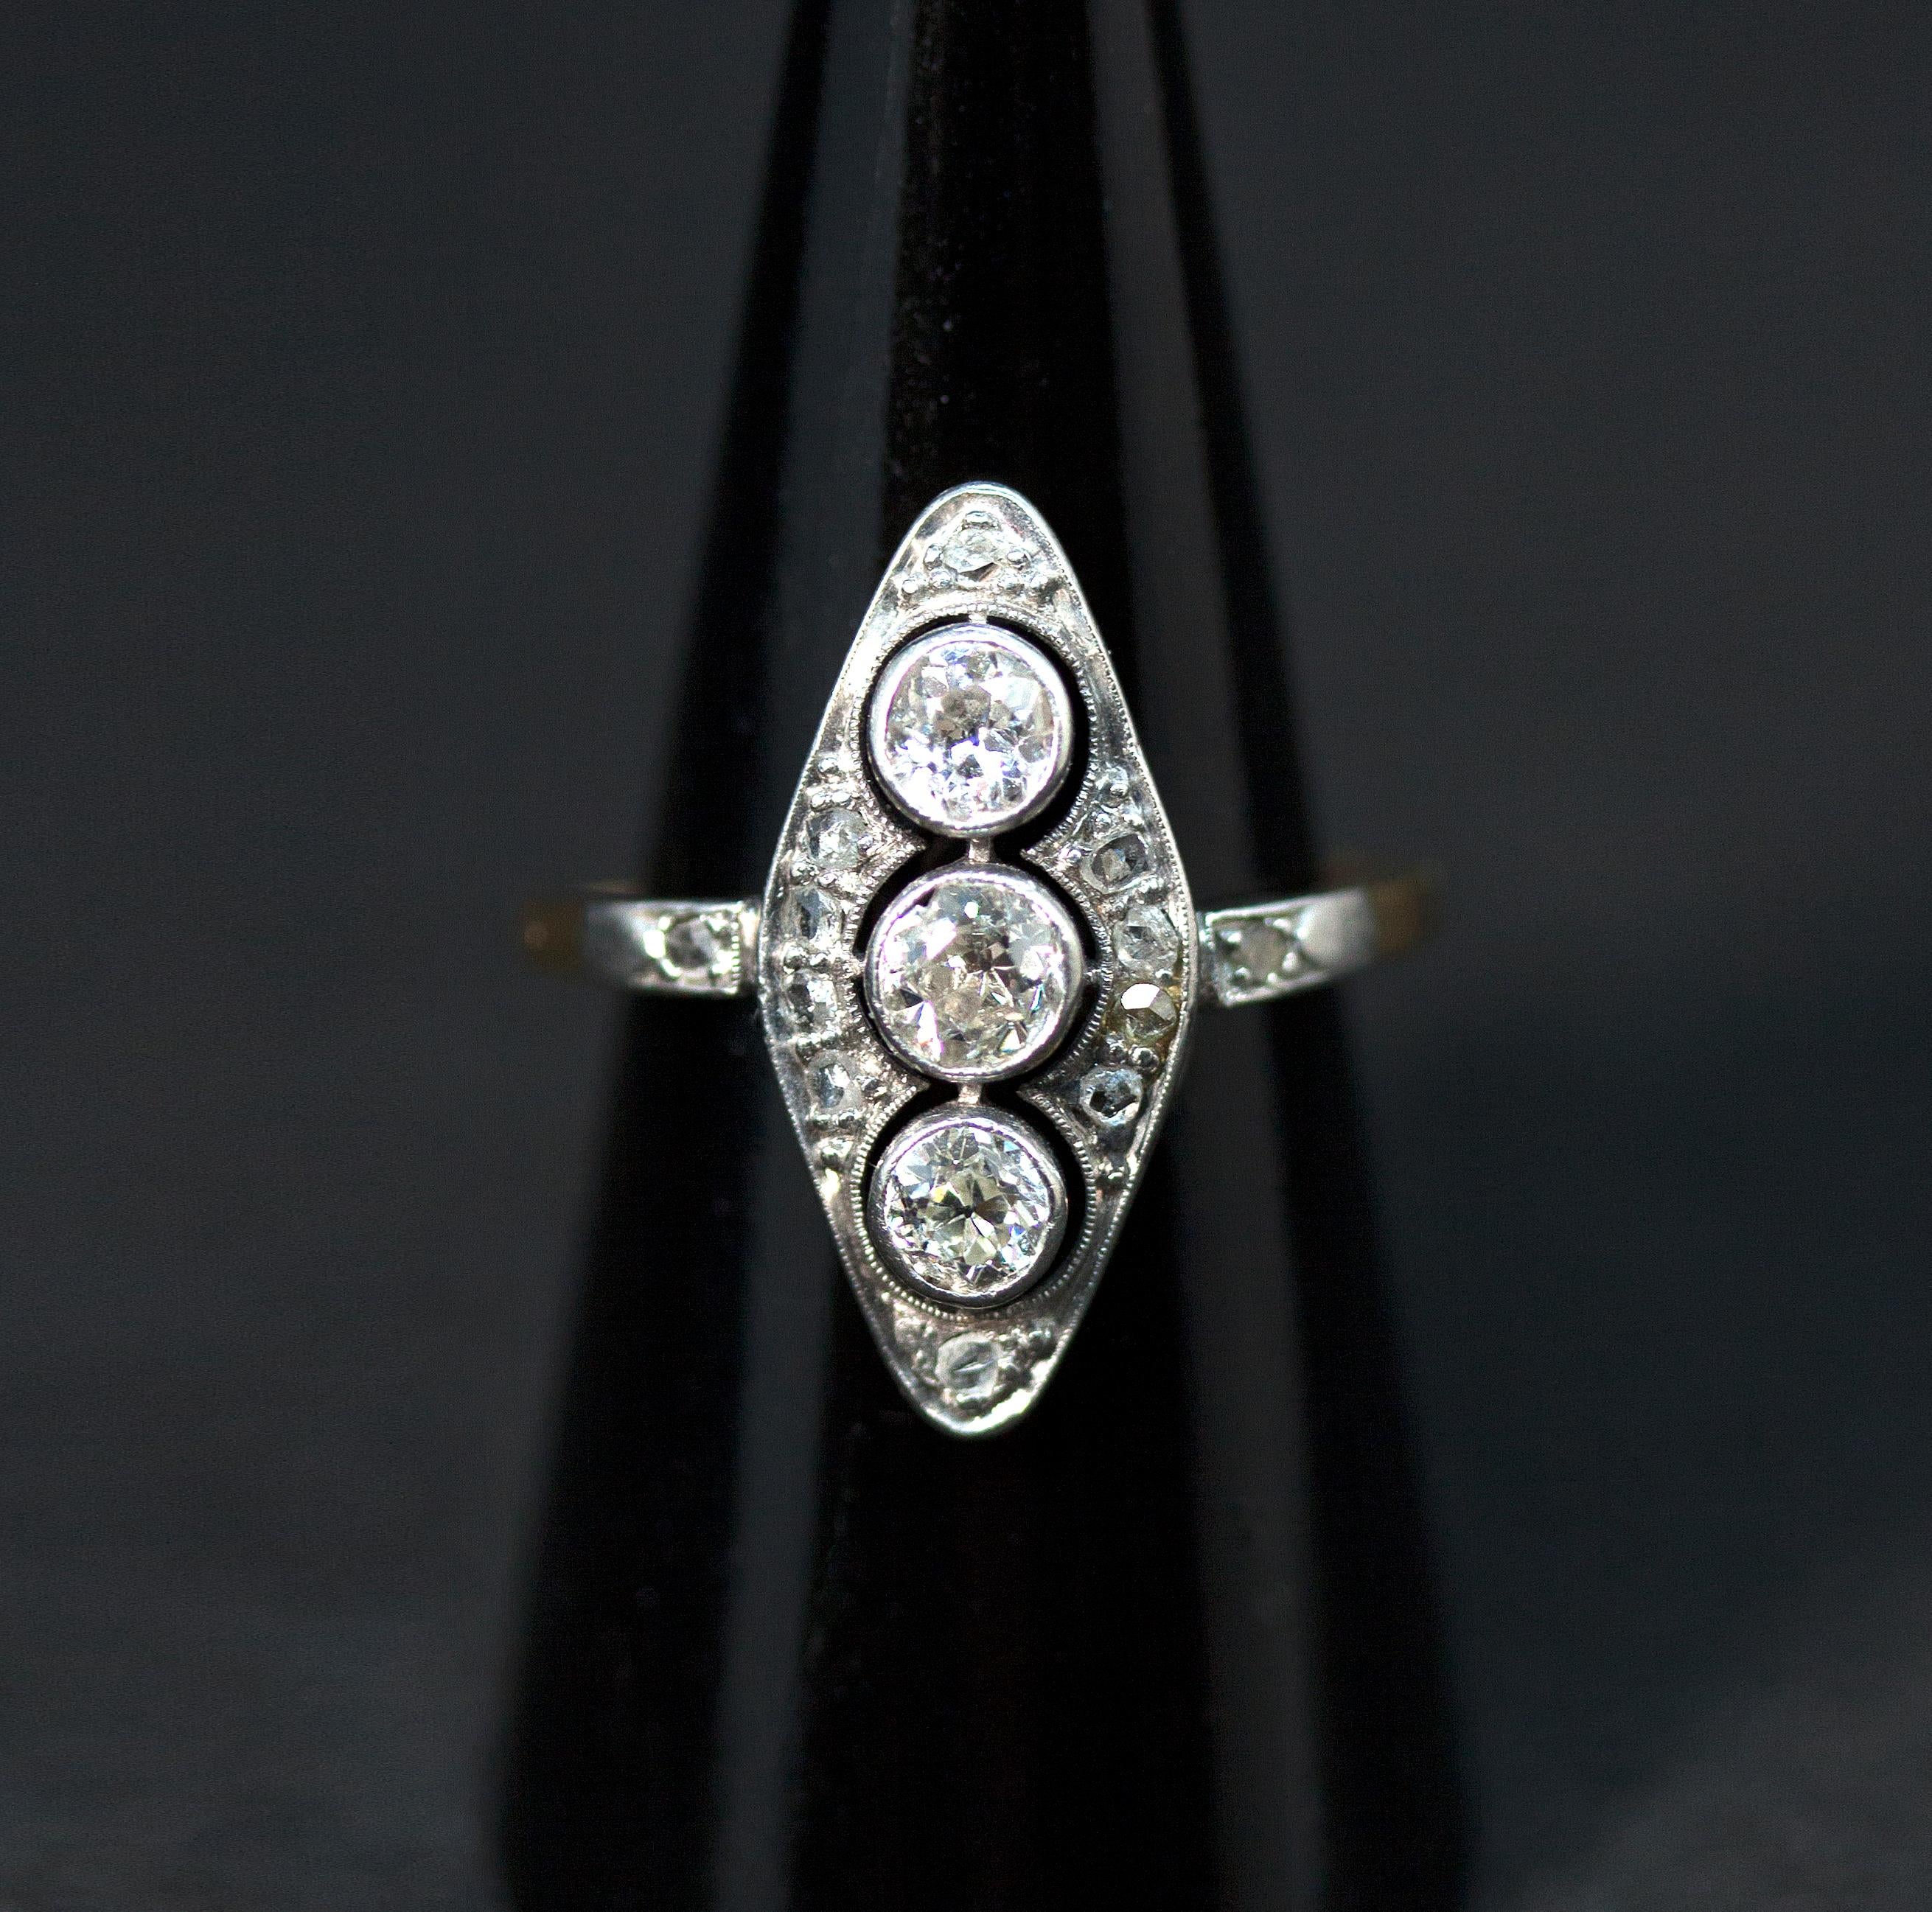 Delicate antique diamond-shaped old brilliant-cut diamond ring, with three old cut diamonds centered in a row estimated 0.25 carat each, surounded by further small diamonds in a millegrain openwork collet, two small stones on the shoulders flanking